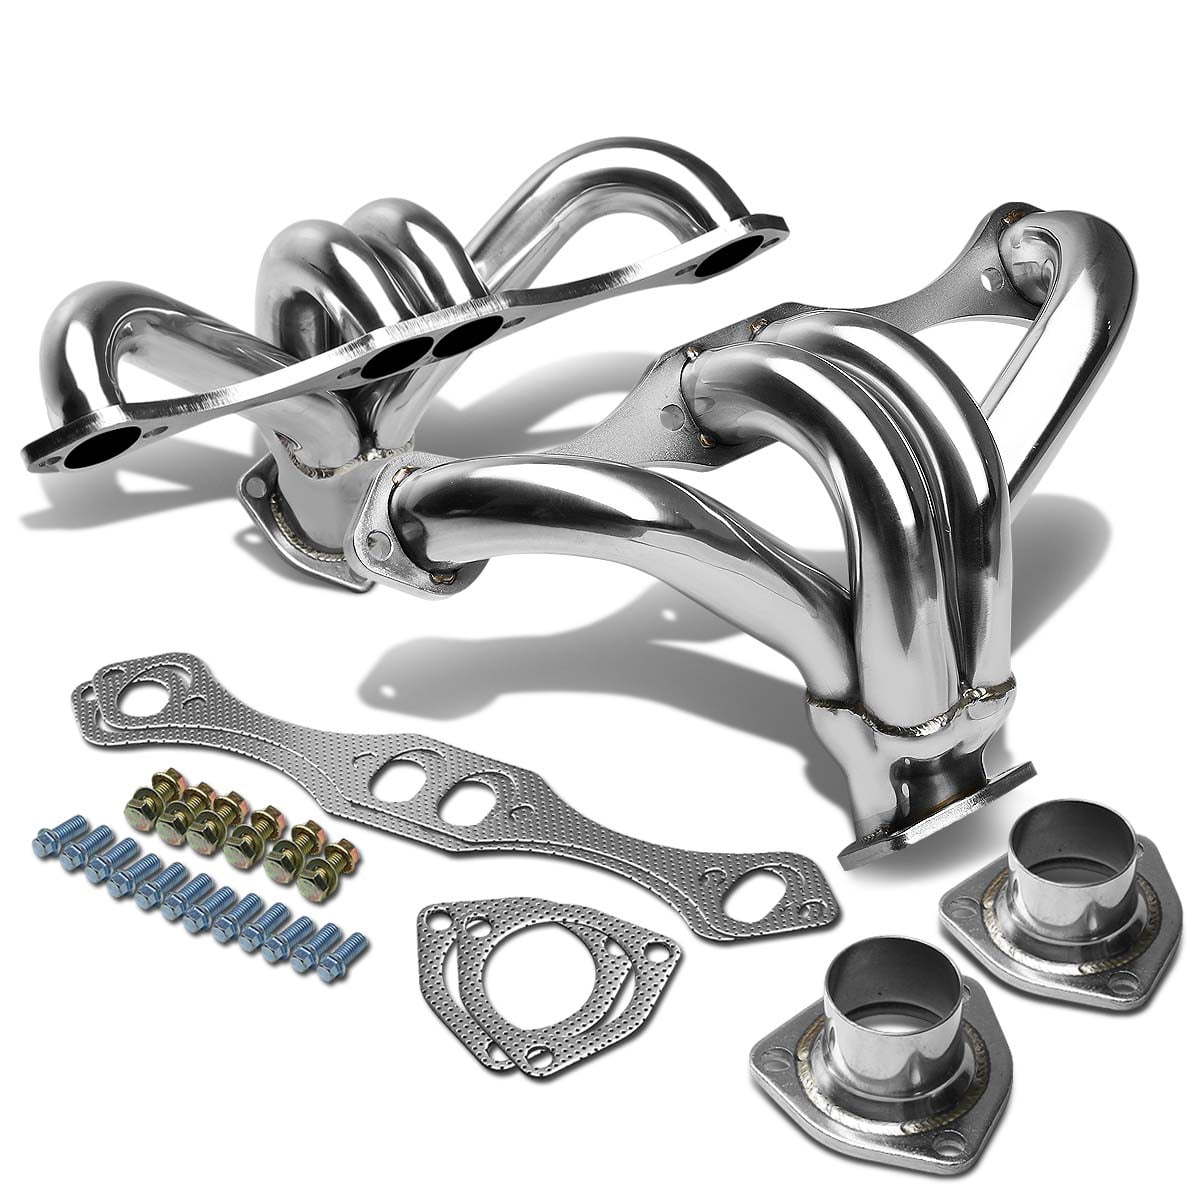 Exhaust Manifolds Automotive Replacement Engine Stainless Exhaust Manifold Header Gaskets Fit for GMC Small Block Hugger 327 305 350 